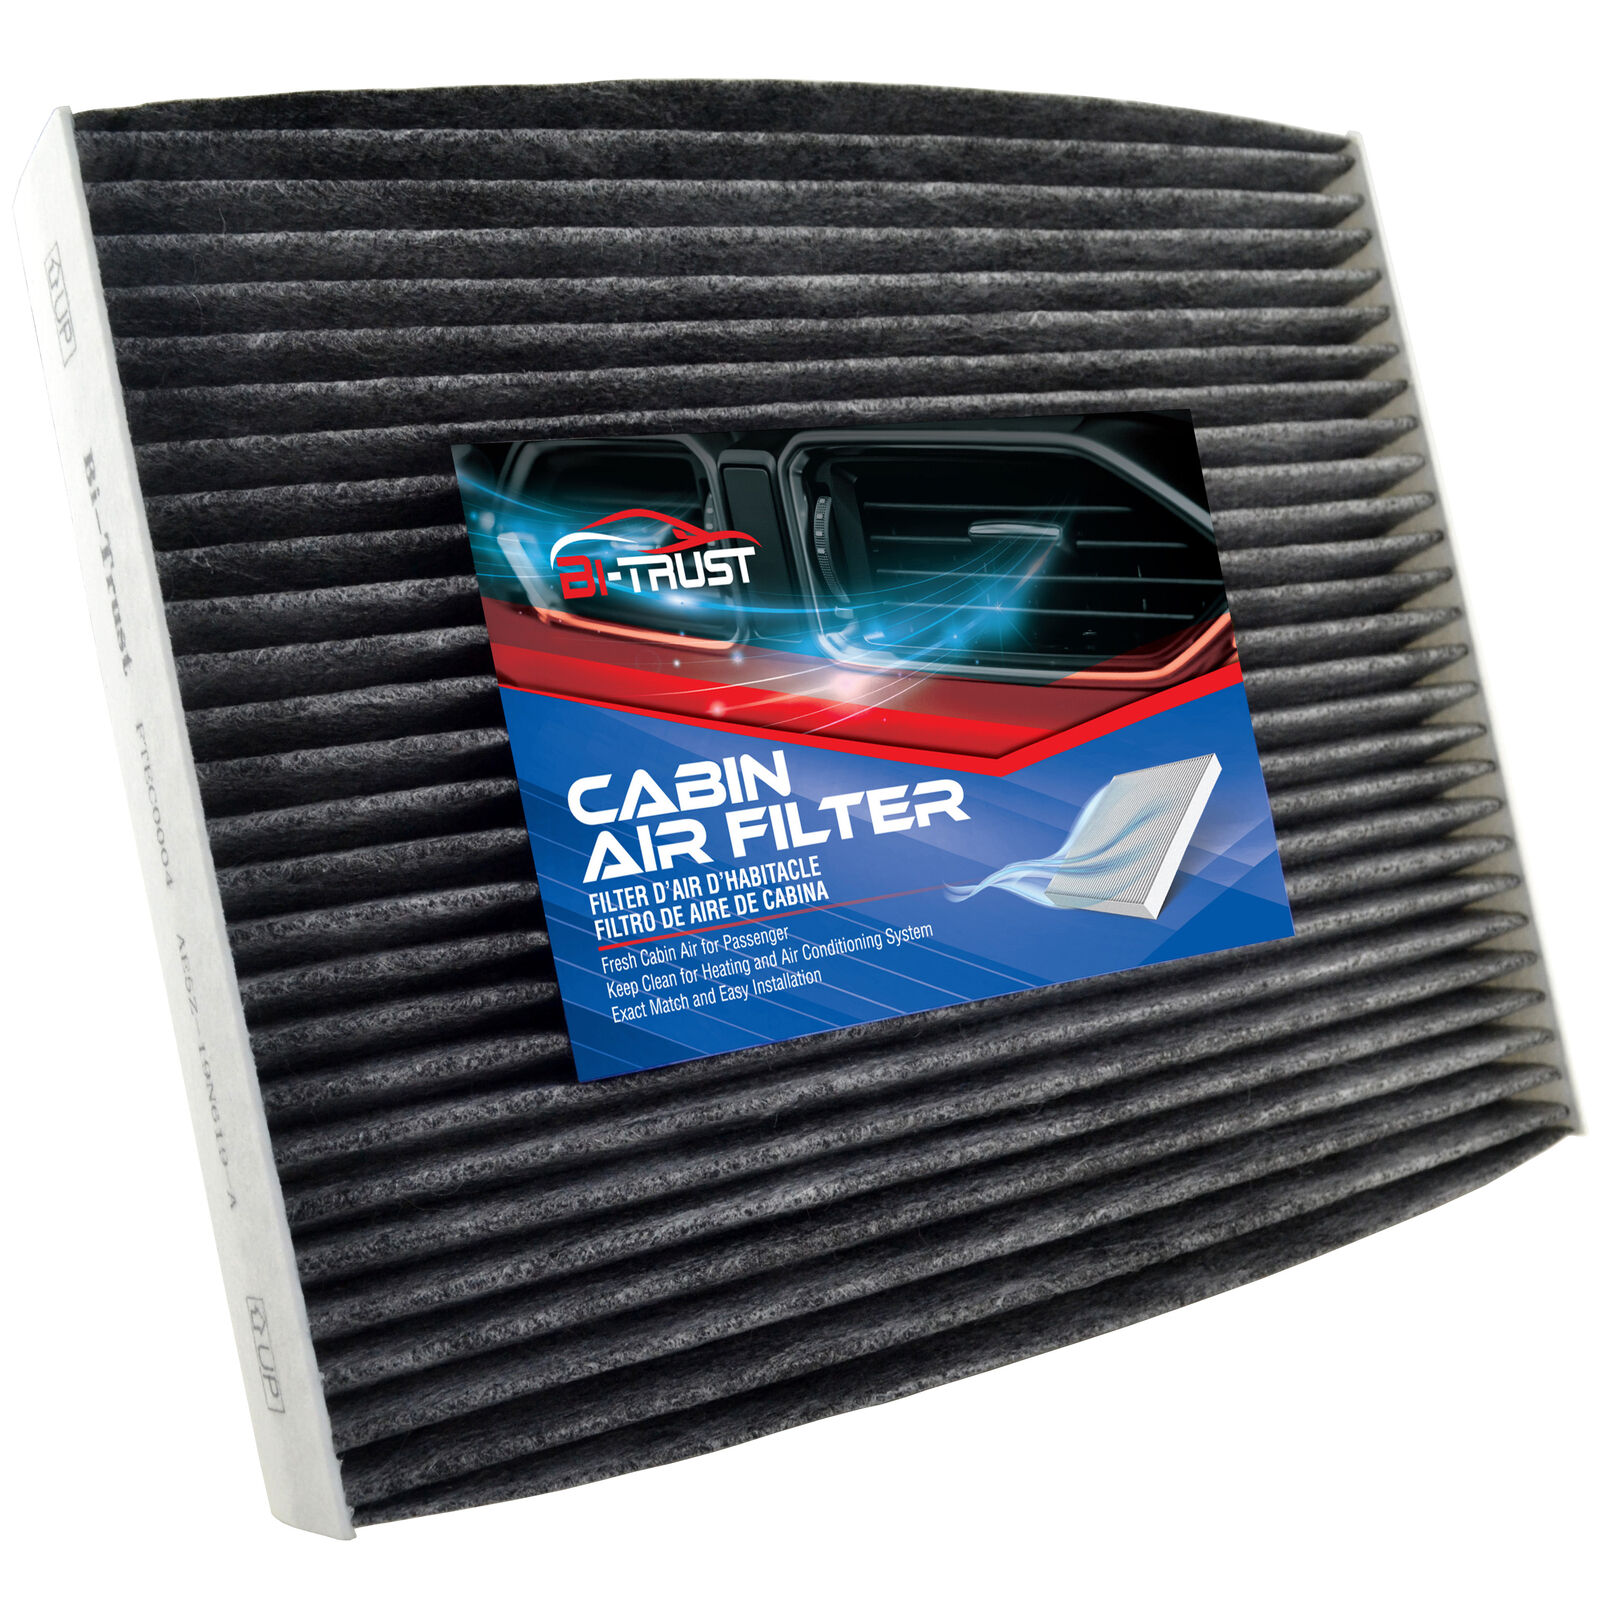 Cabin Air Filter for Ford Fusion Lincoln MKZ 2010-2012 Mercury Milan 2010-2011